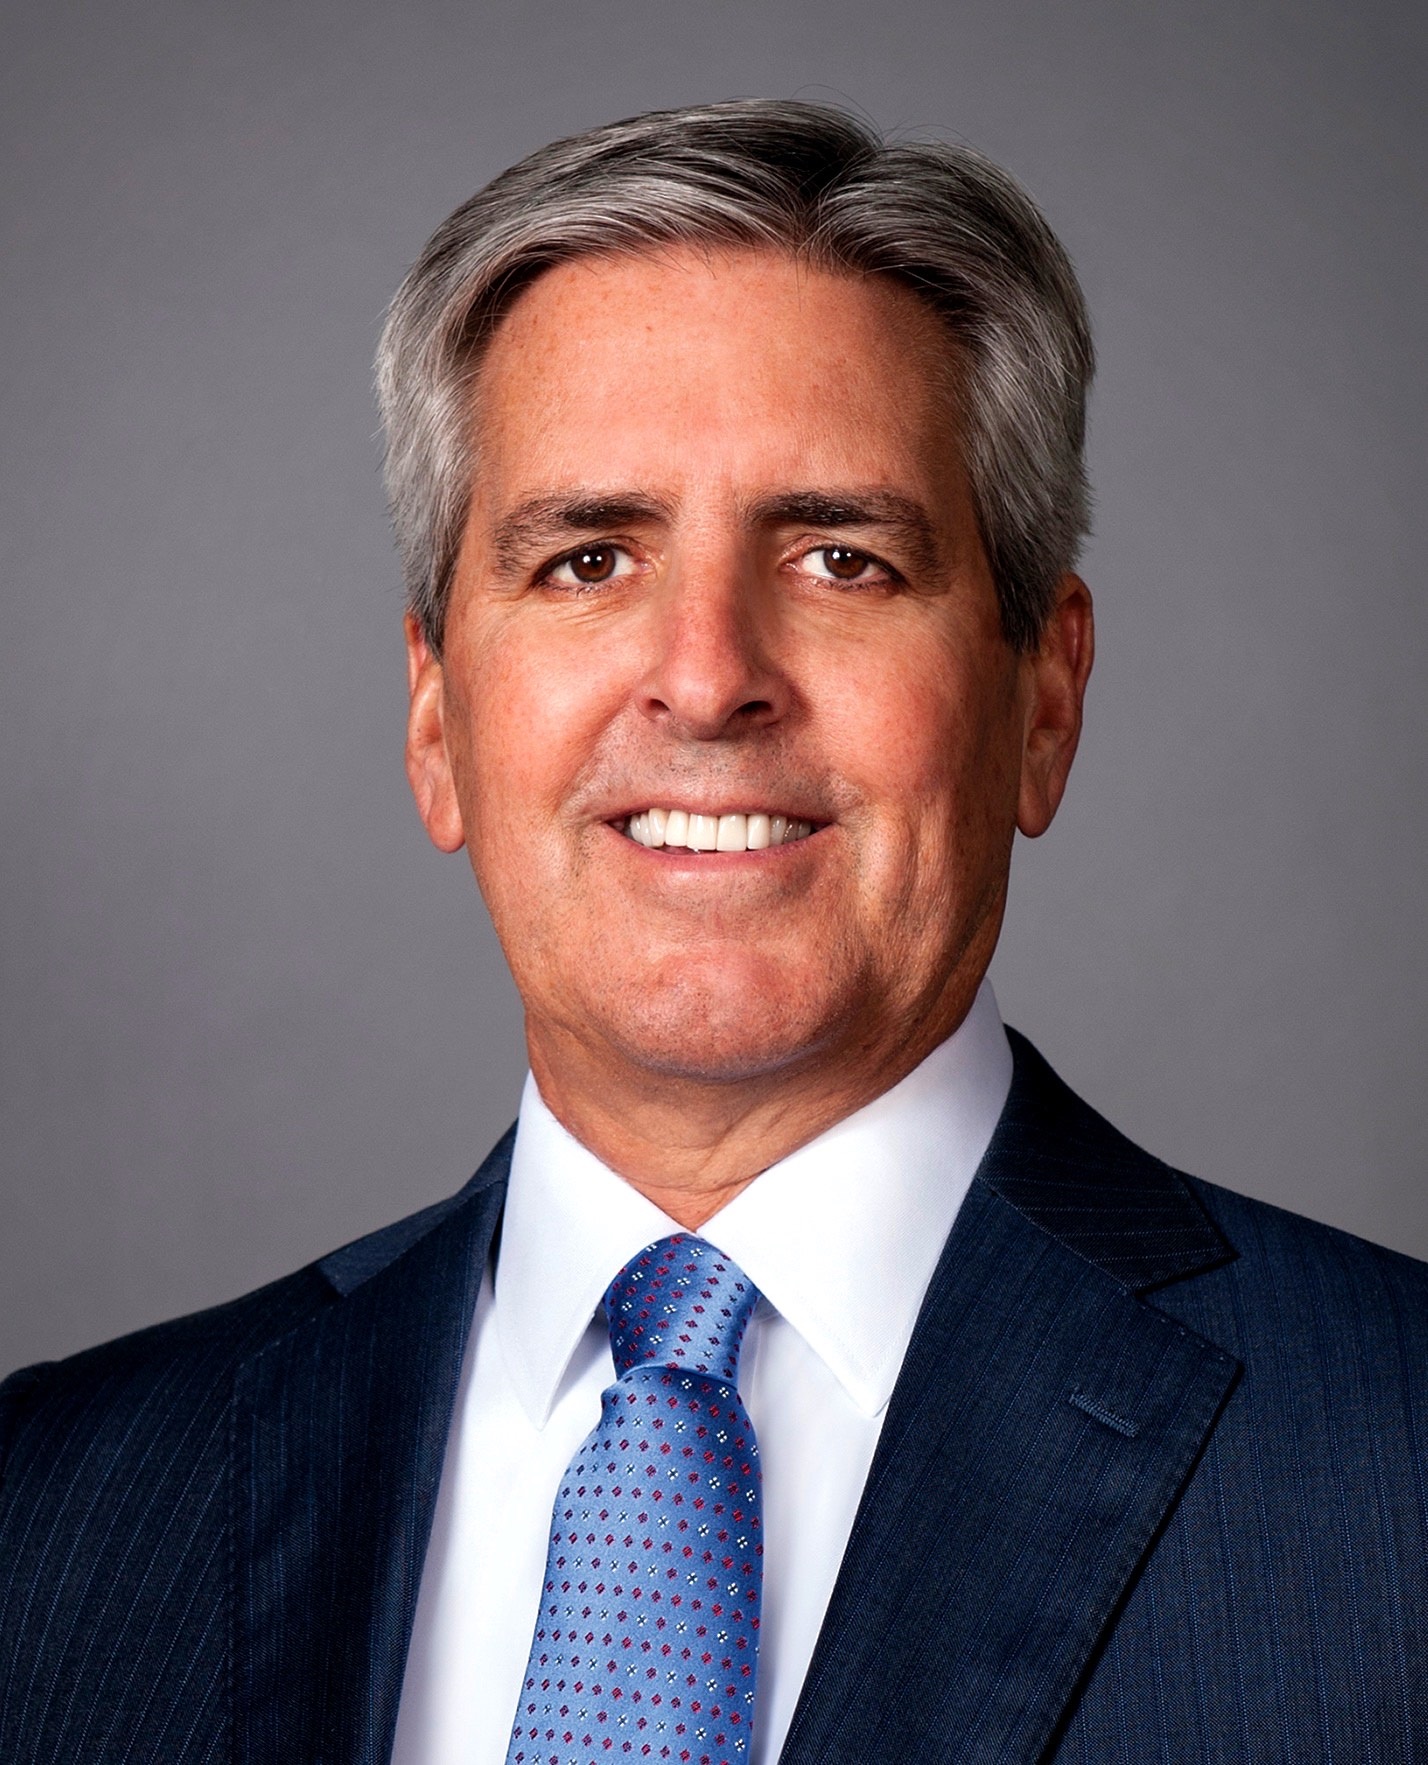 David H. Stevens has an extensive career in the mortgage industry, including his current role as CEO of Mountain Lake Consulting